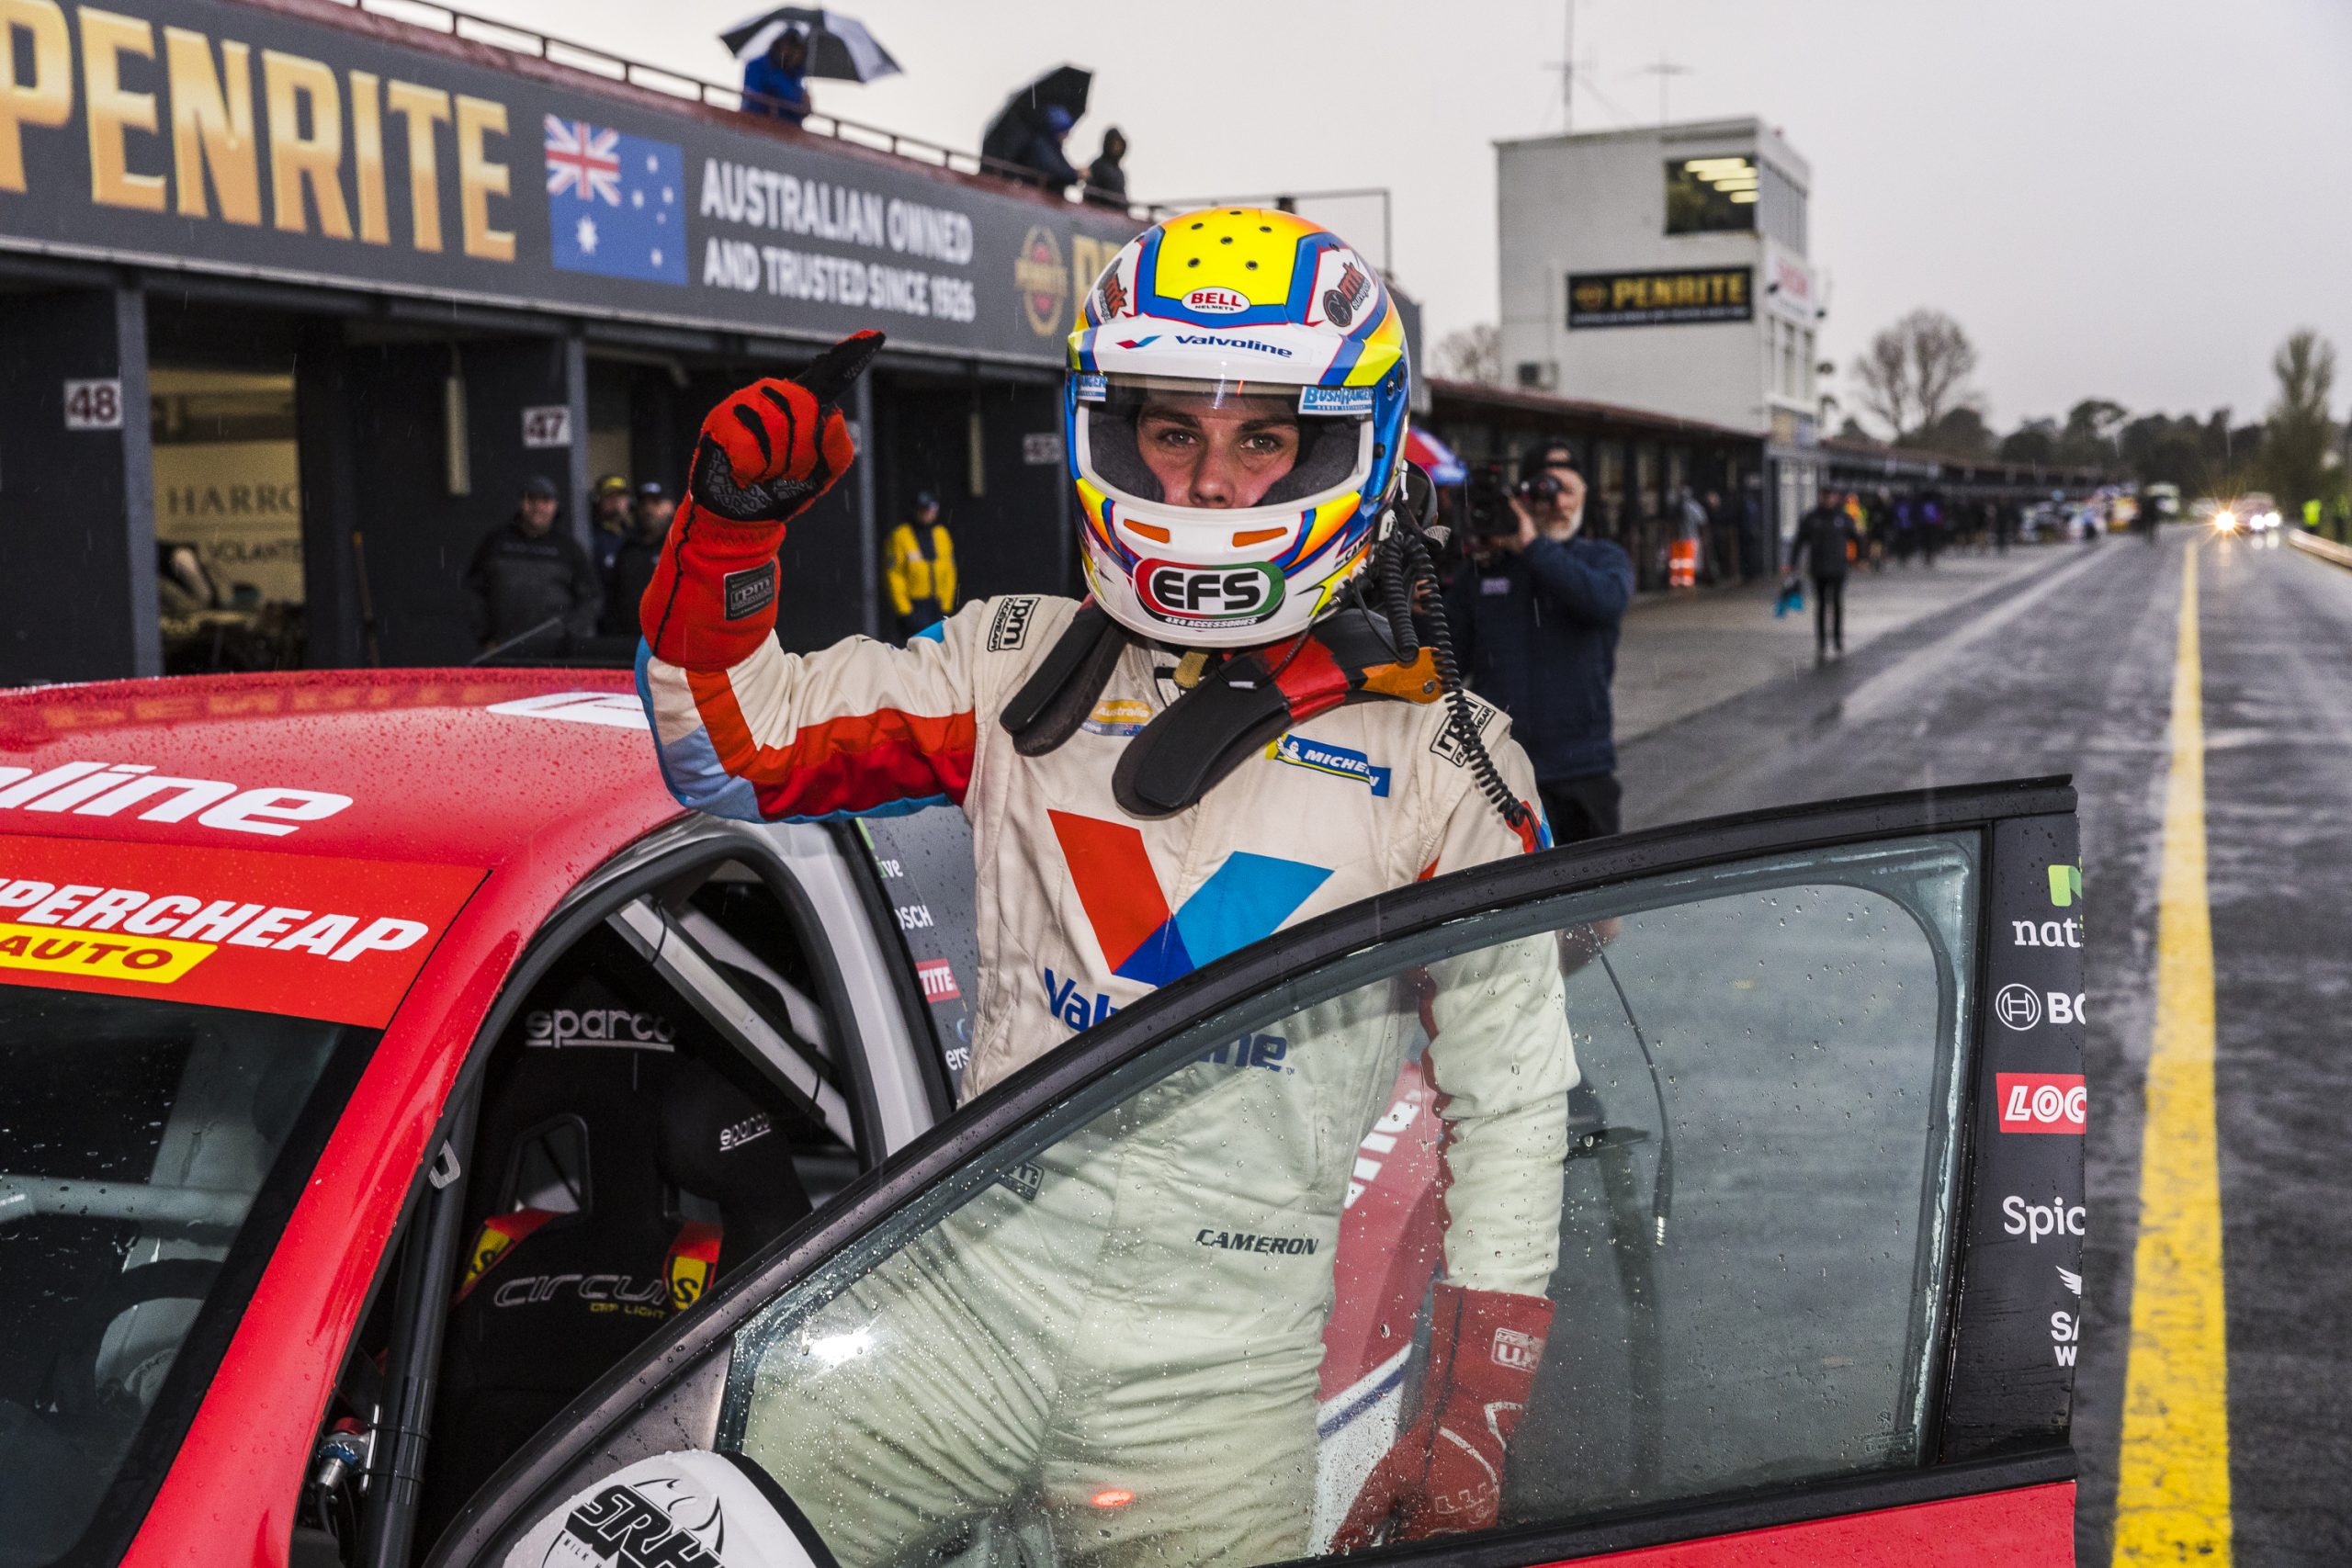 AARON CAMERON HOLDS ON IN DRAMATIC OPENING SUPERCHEAP AUTO TCR AUSTRALIA SERIES RACE